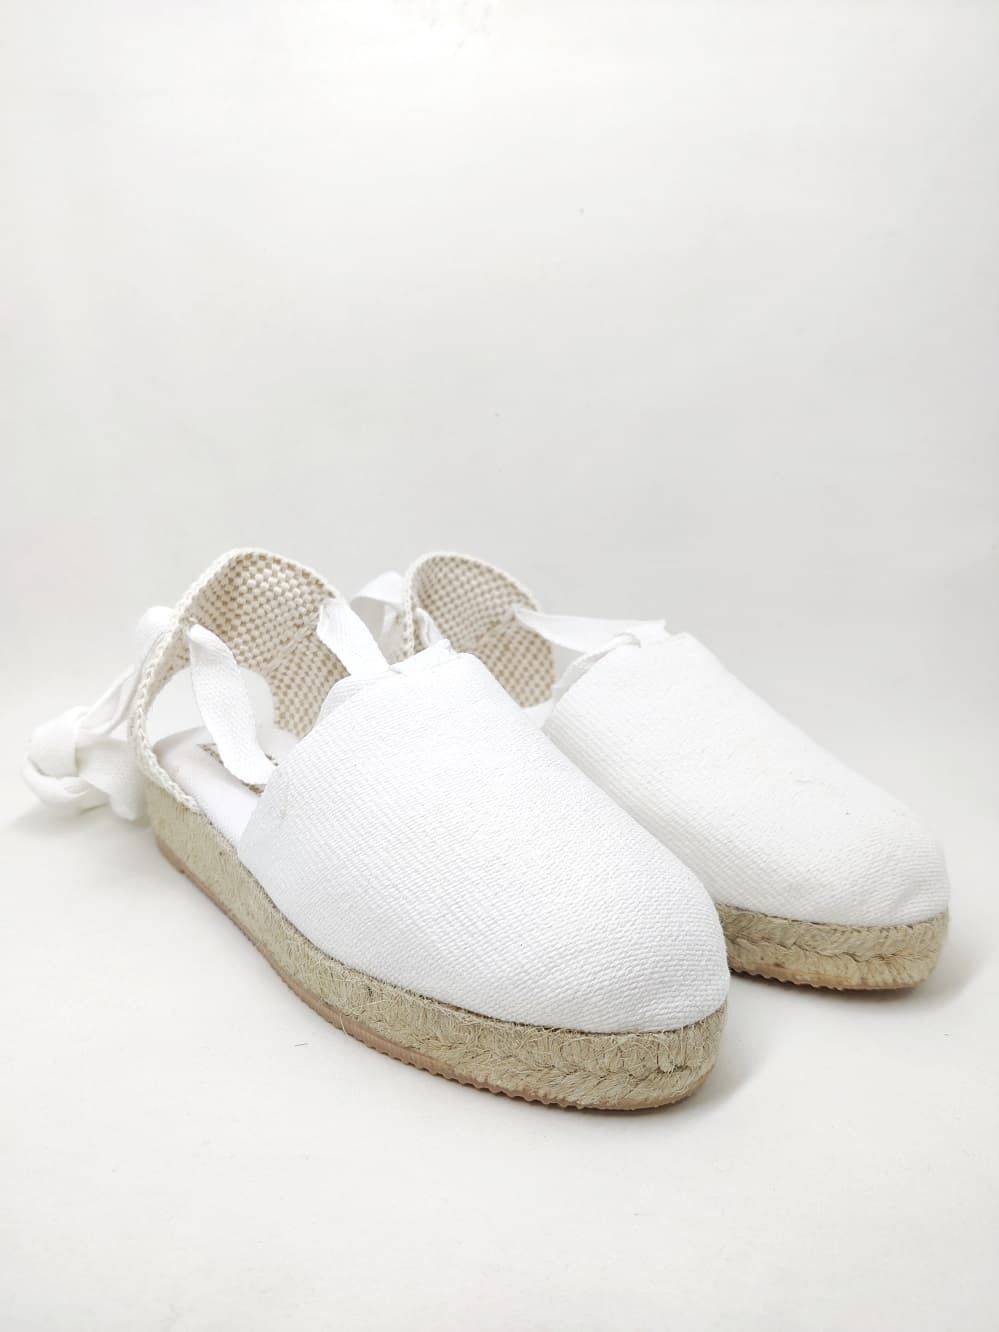 White wedge espadrilles with ribbons for girls and women - Image 2